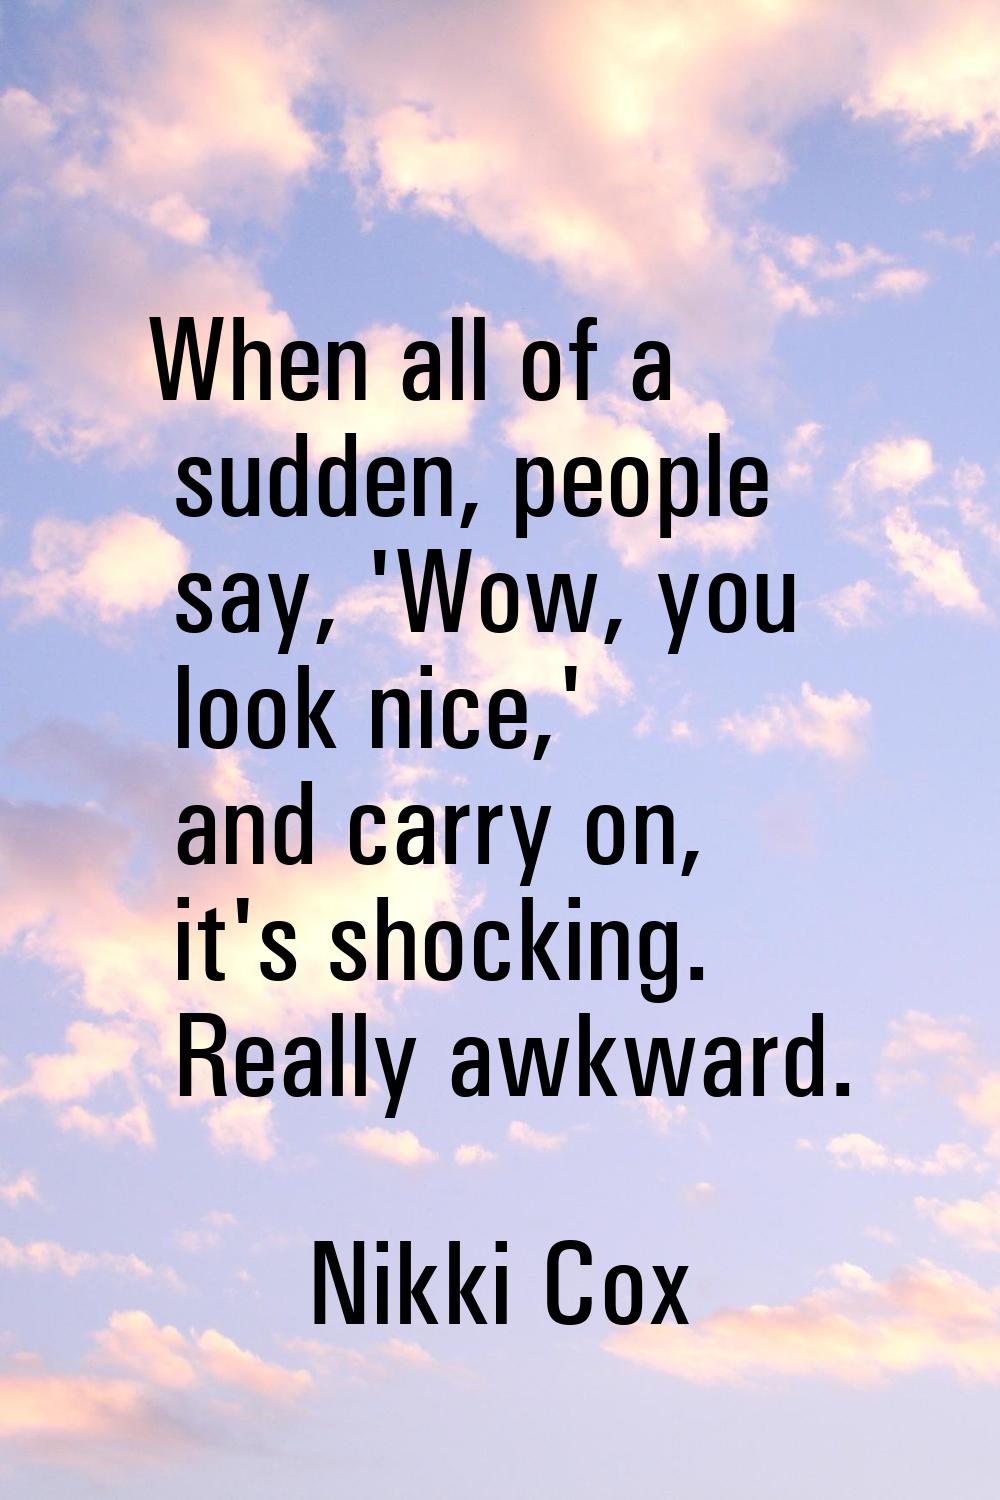 When all of a sudden, people say, 'Wow, you look nice,' and carry on, it's shocking. Really awkward